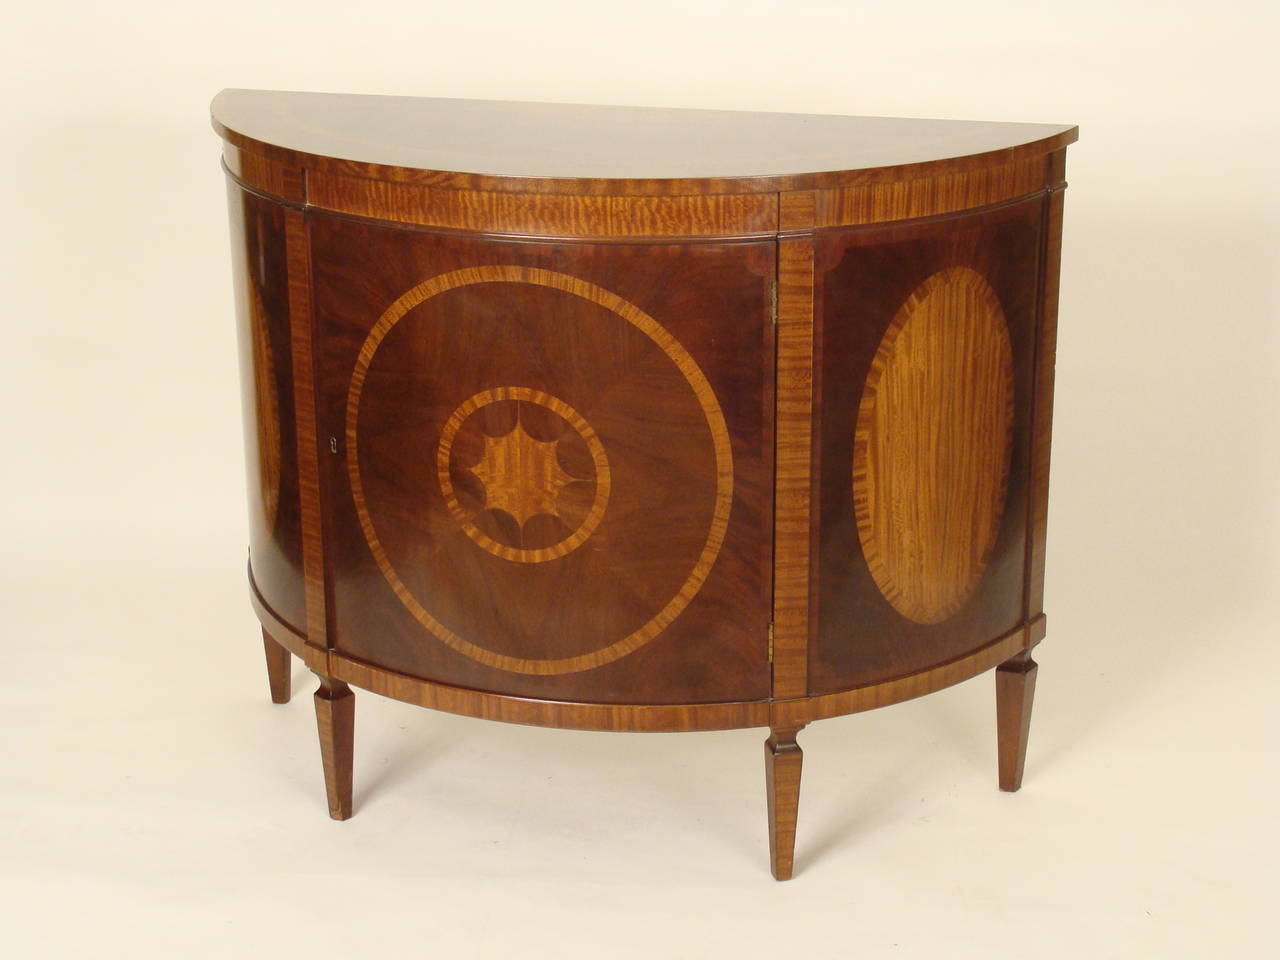 George III style mahogany demi lune cabinet with satinwood inlay made by Baker, the Charleston collection ,approximately 25 years old.